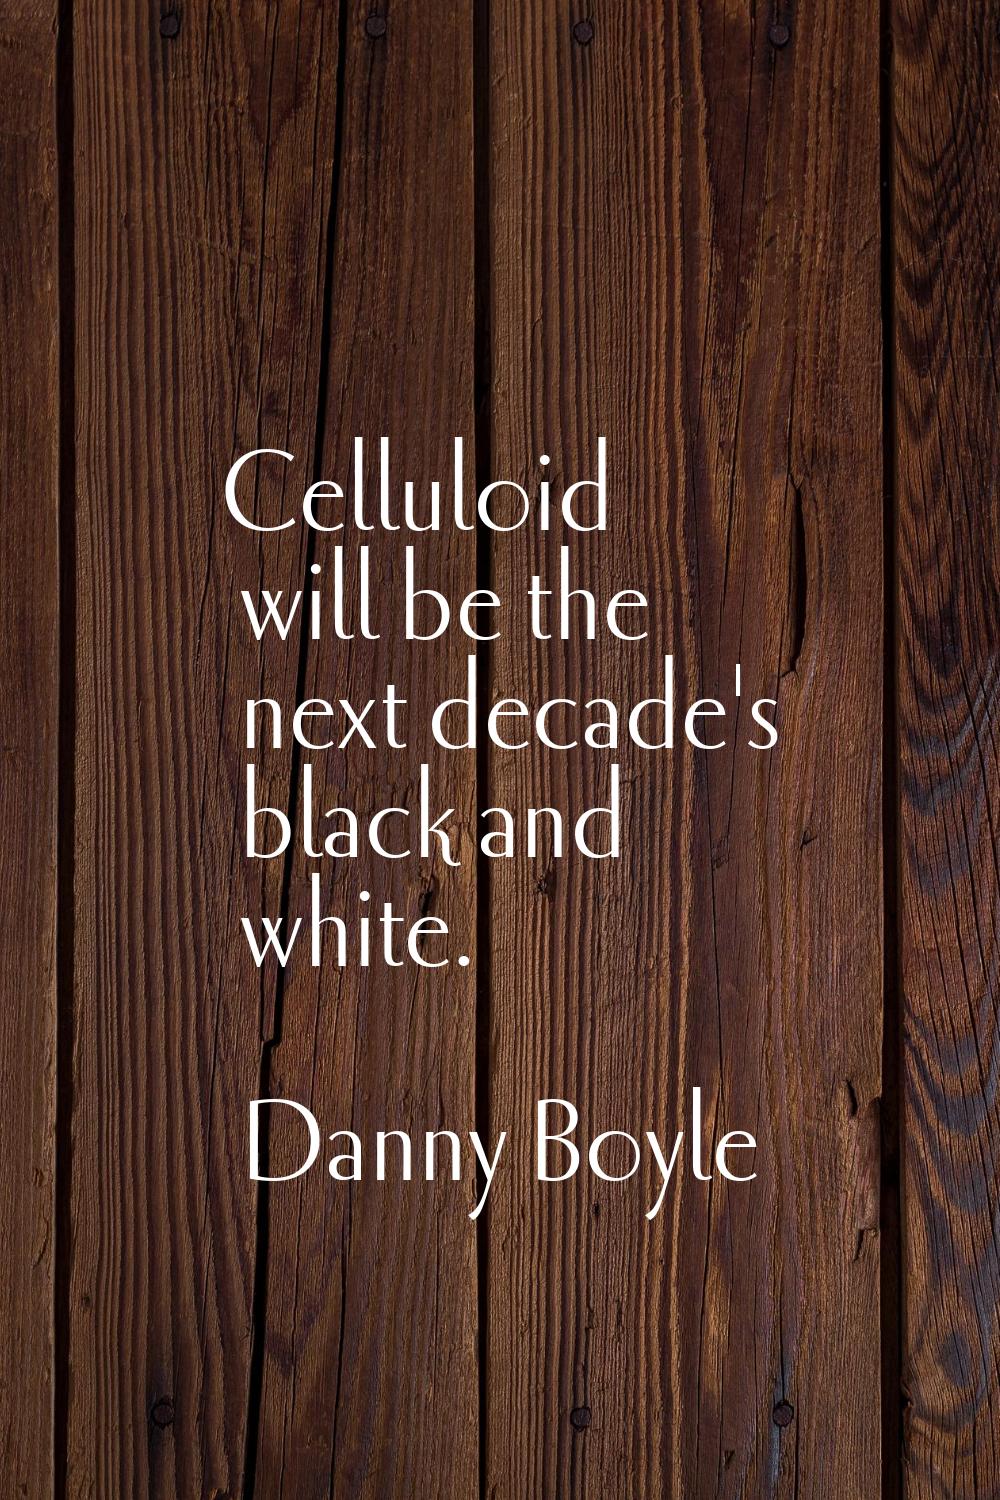 Celluloid will be the next decade's black and white.